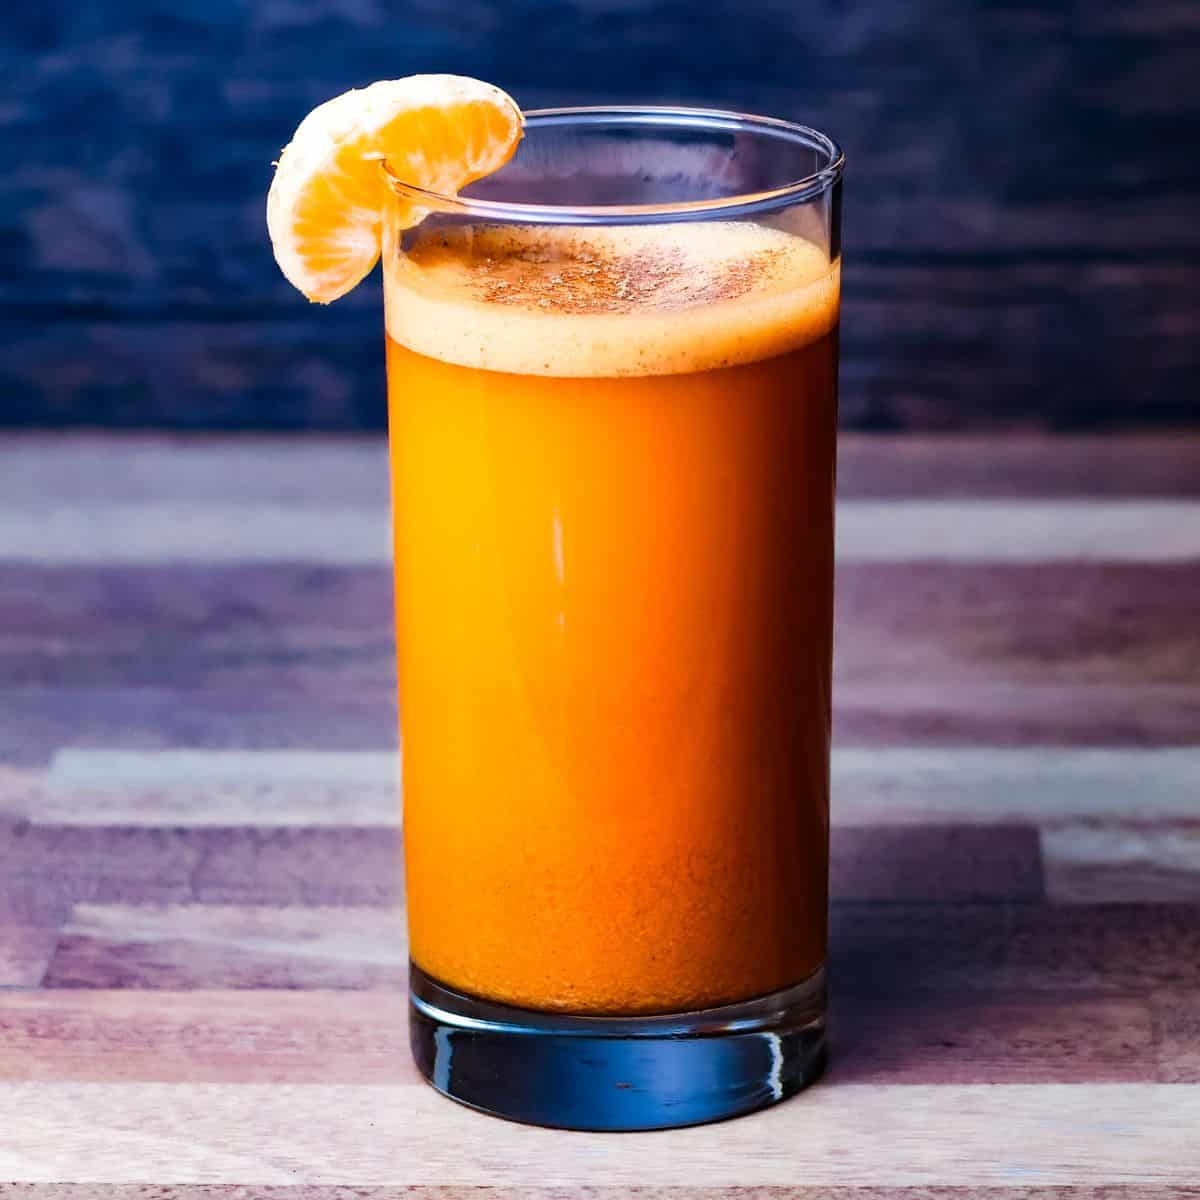 A tall glass filled with rich, orange-colored sweet potato juice, garnished with a bright orange slice on the rim, set against a dark, wooden background. A light frothy layer sits atop the juice, indicating its freshness.